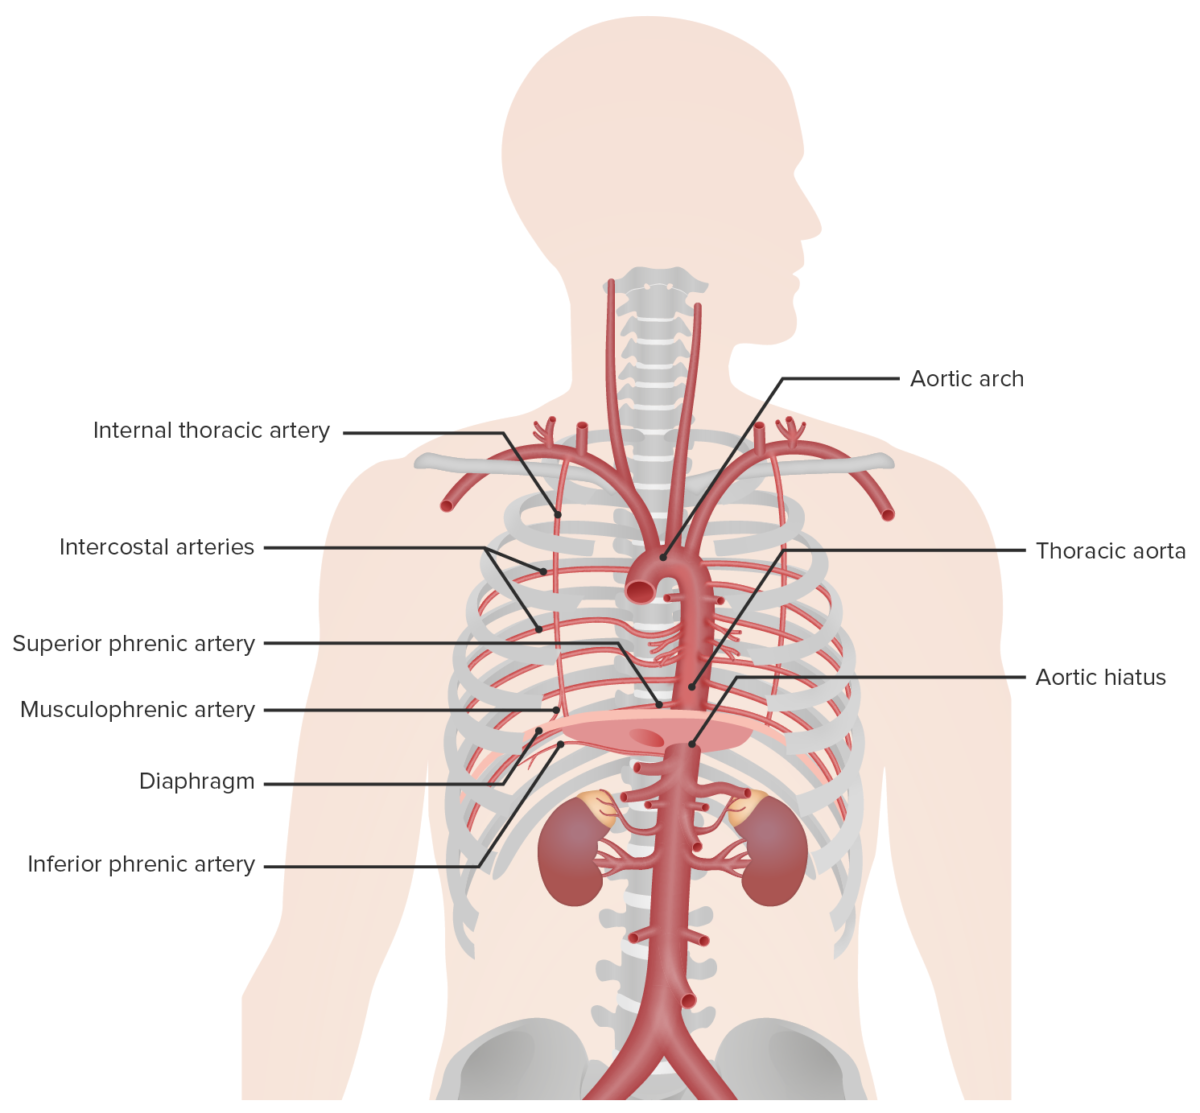 Blood supply of the diaphragm